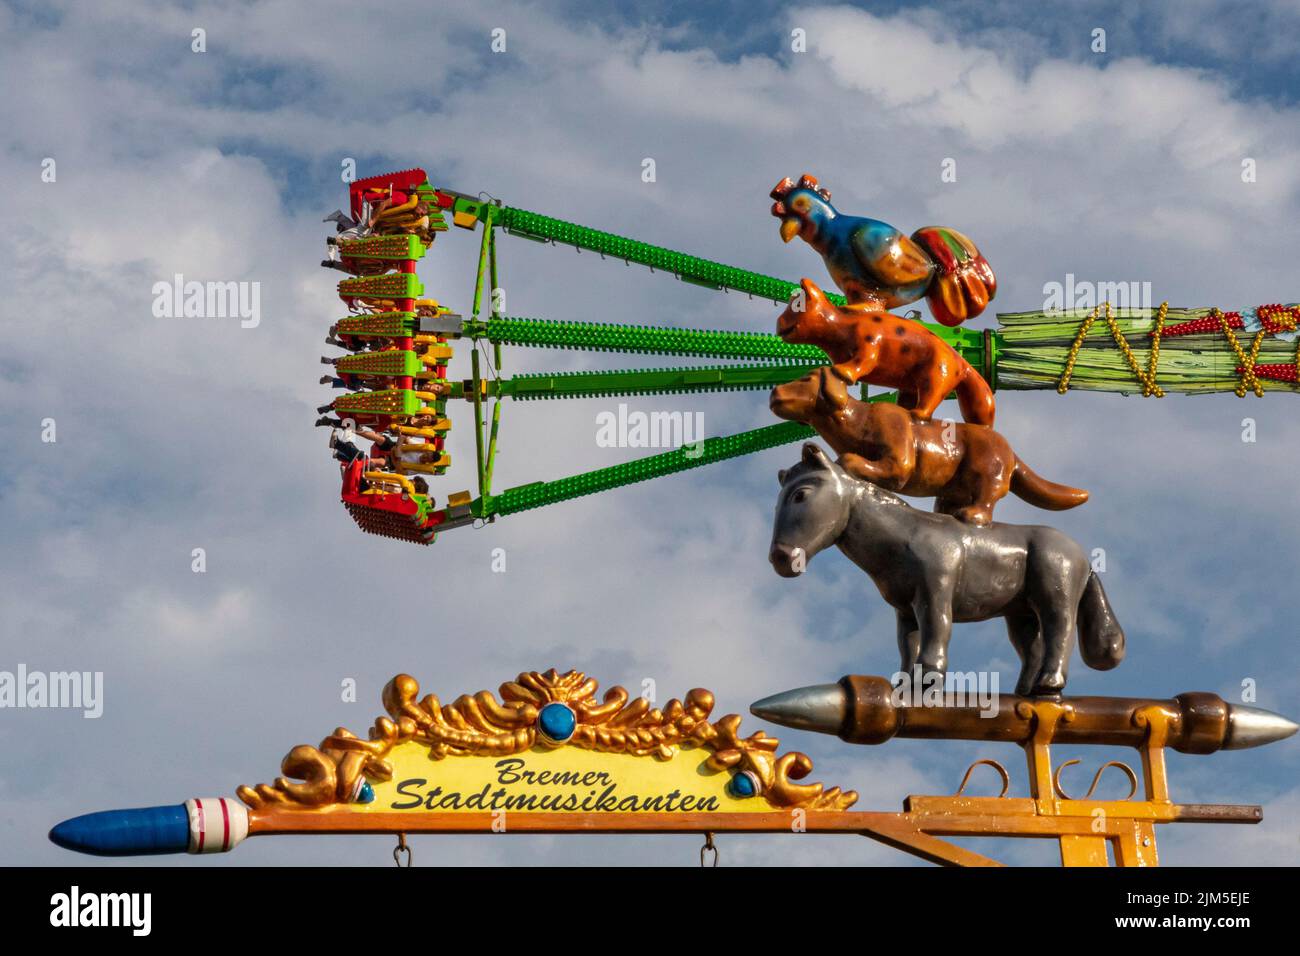 Cranger Kirmes, Herne, NRW, Germany, 04th Aug 2022. People on the 'Konga' ride appear to be watched by the 'Bremer Stadtmusikanten', popular animals from a German fairy tale. Visitors enjoy the many attractions, roller coasters, beer halls, carousels and more at the Cranger Kirmes fun fair soft opening ahead of the official opening ceremony tomorrow. This is the first time it takes place since Covid restrictions took hold in 2020. The third largest fun-fair in Germany, and largest in Germany's most populous state NRW, usually attracts 4m  visitors over 10 days. It has a long tradition with fai Stock Photo